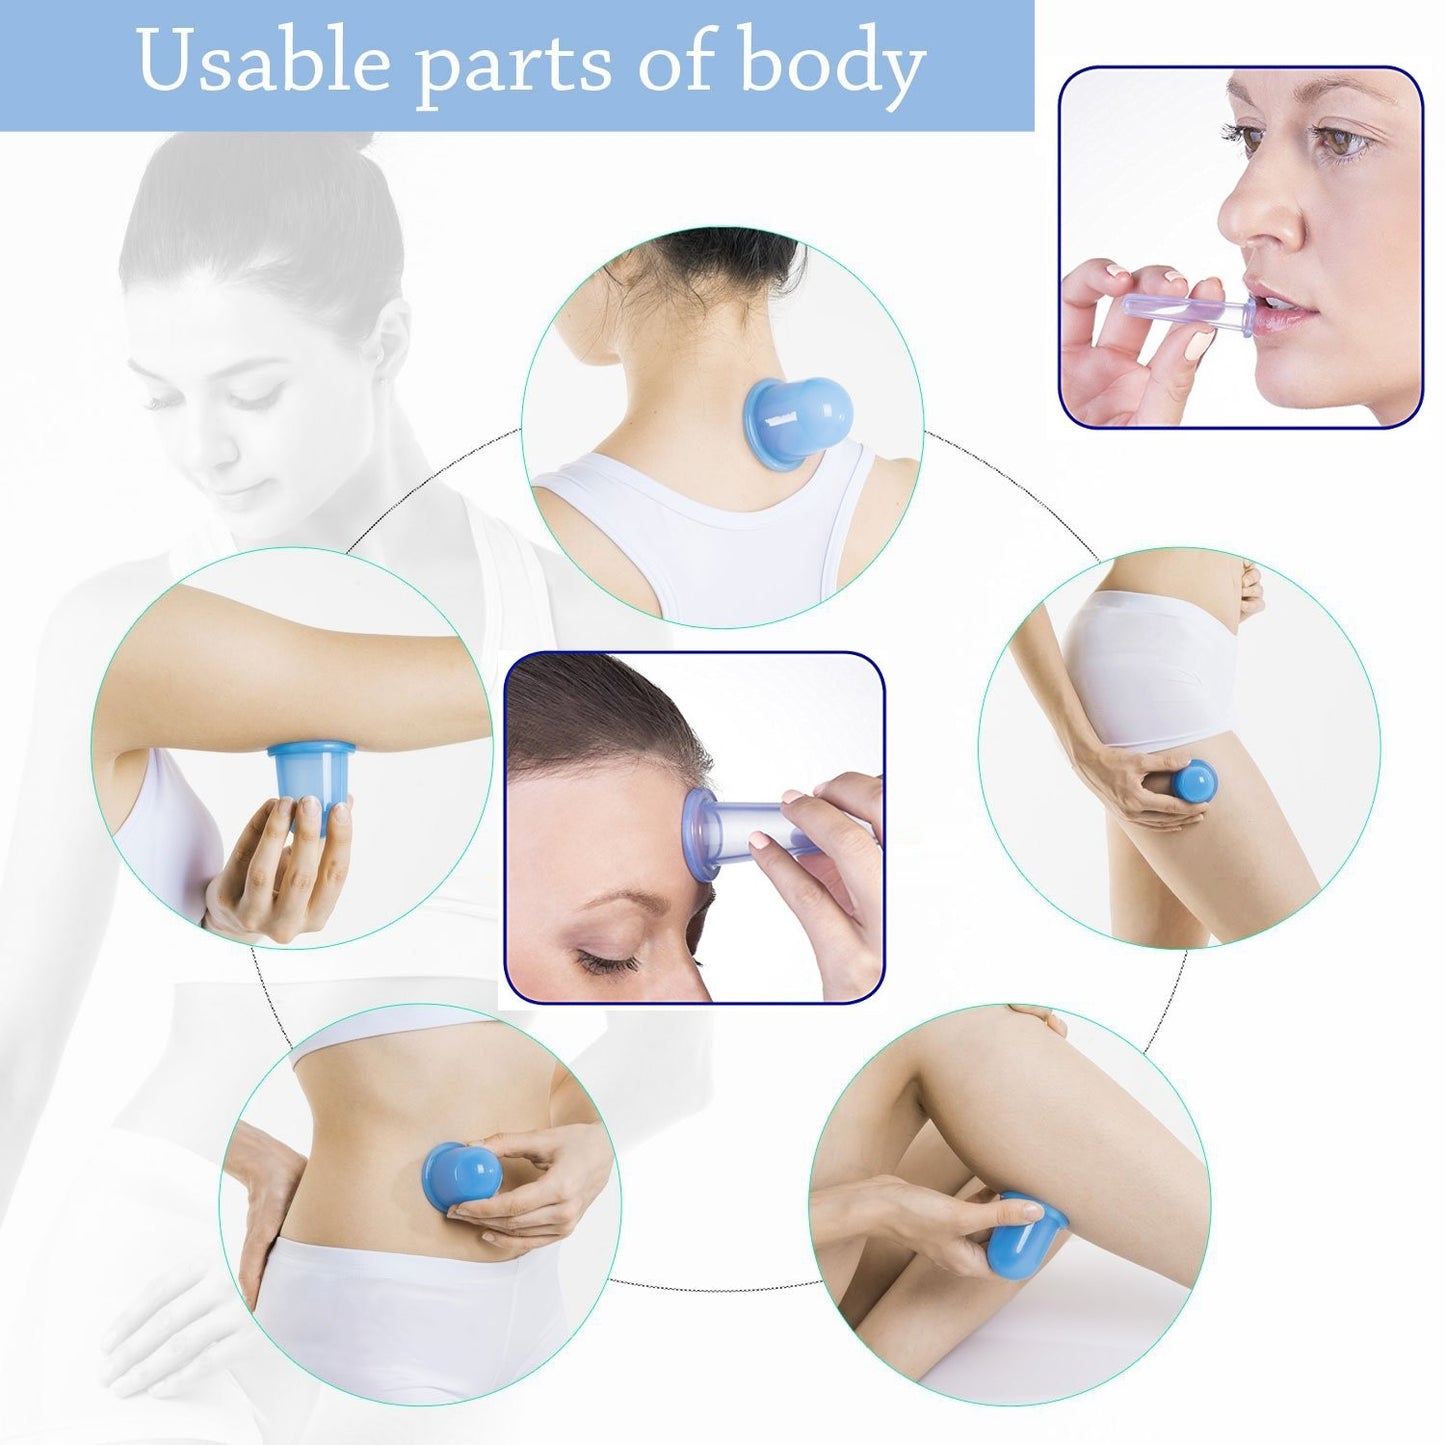 Anti Cellulite Vacuum Cups/Cupping Therapy Sets/Facial and Body Massage Cupping Set